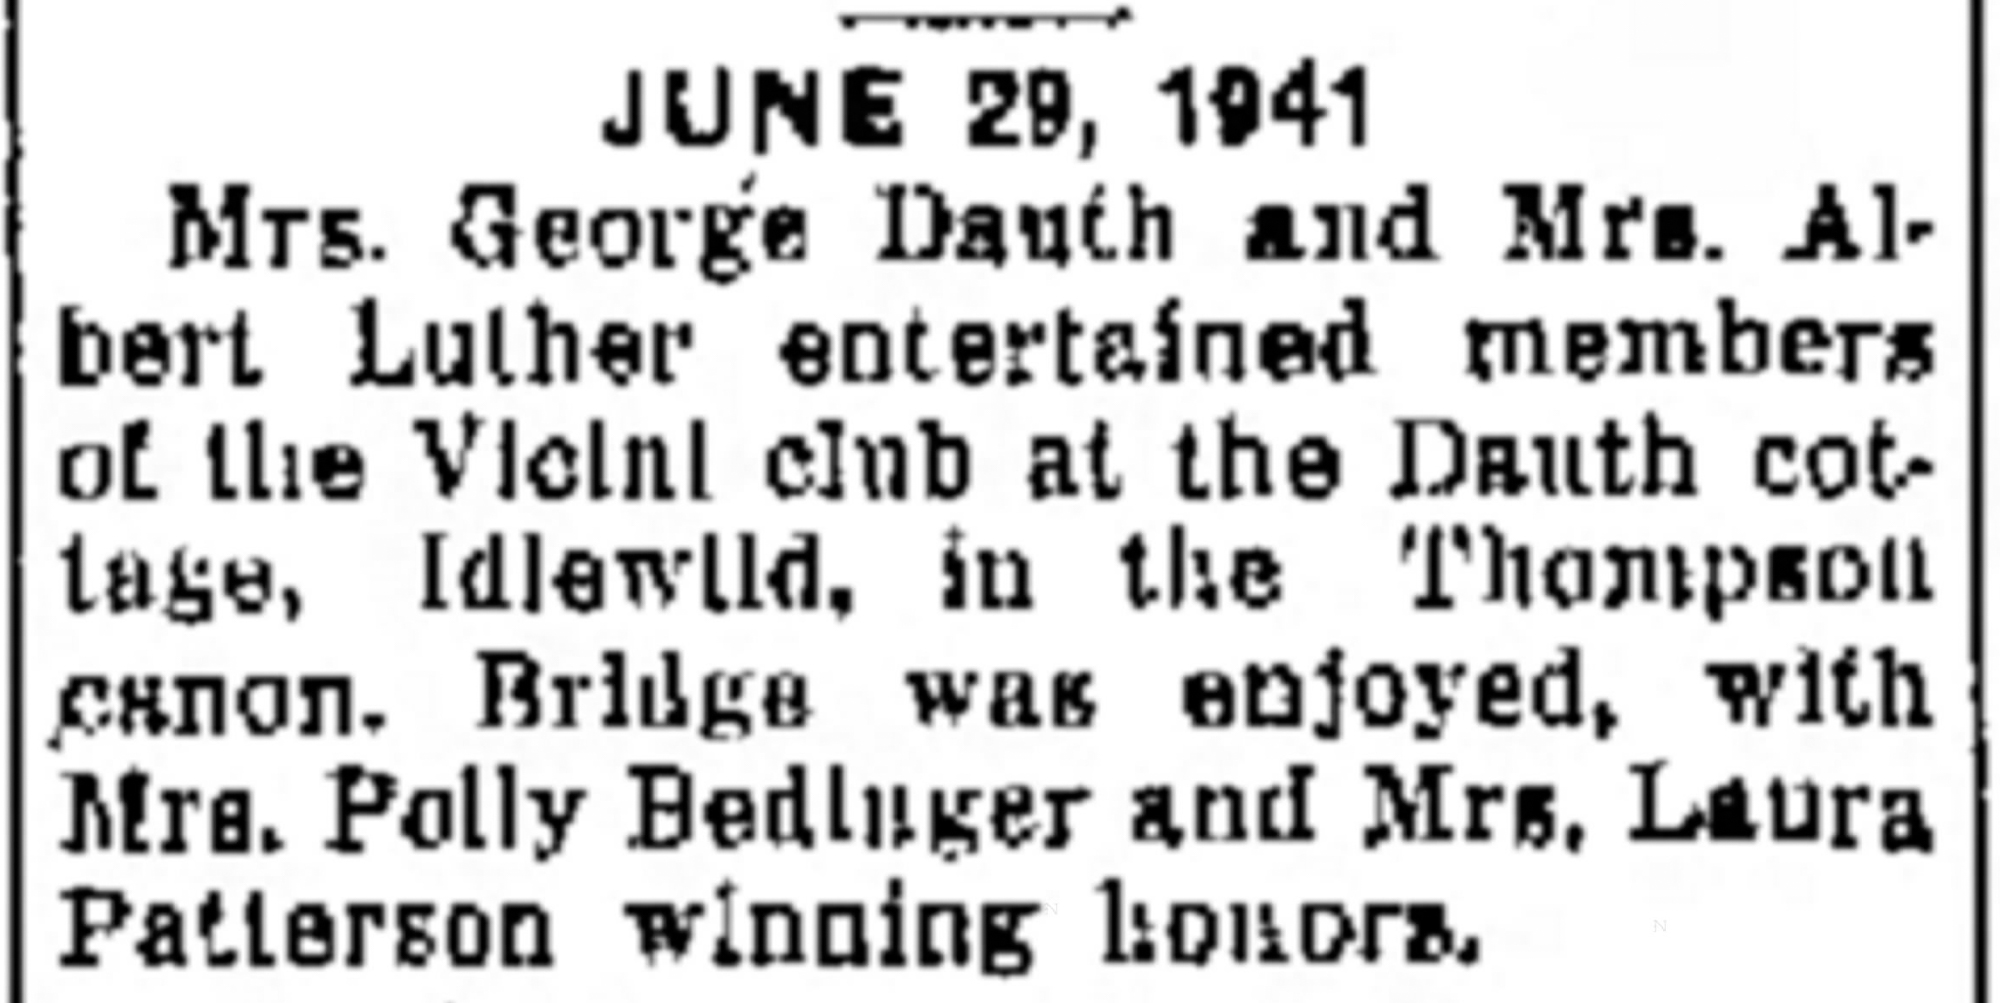 Dauth Family Archive - 1951-06-29 - Greeley Daily Tribune - Florence Dauth Hosting Vicini Club at Idlewild Lodge